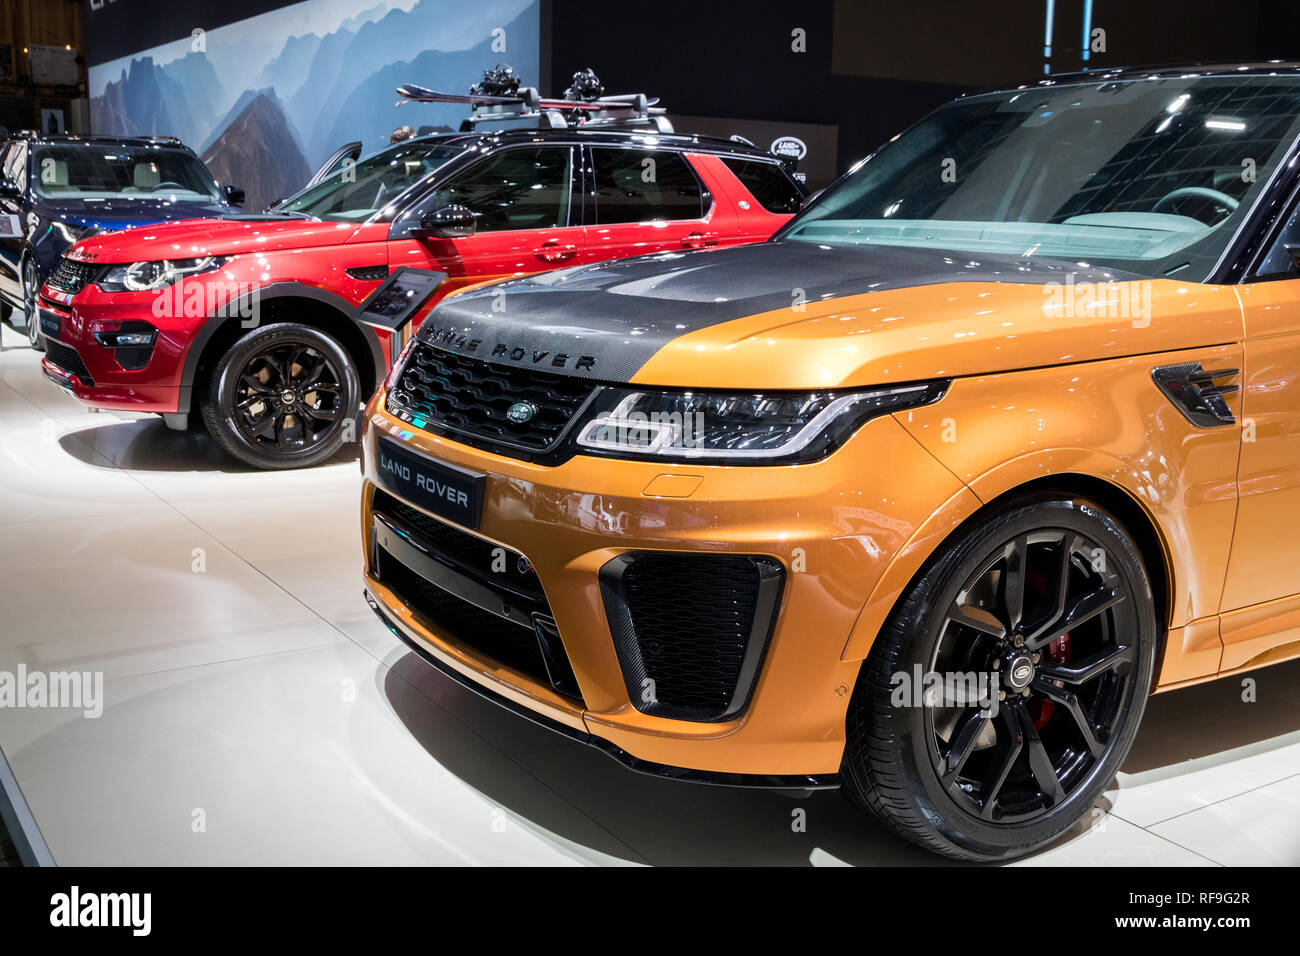 BRUSSELS - JAN 18, 2019: Range Rover Land Rover car showcased at the 97th Brussels Motor Show 2019 Autosalon. Stock Photo